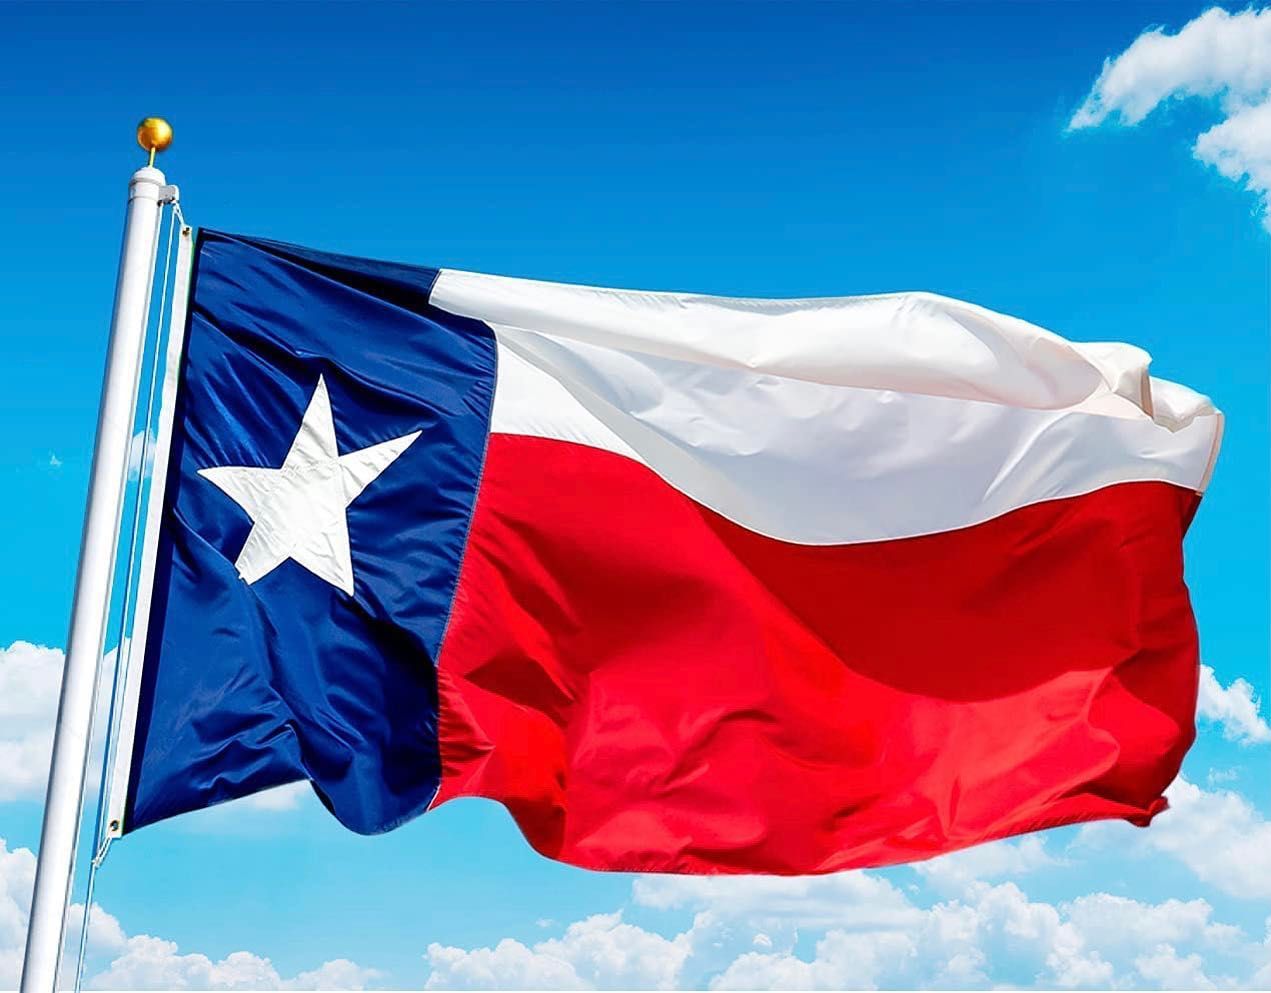 Texas - The Greatest Country in the World.